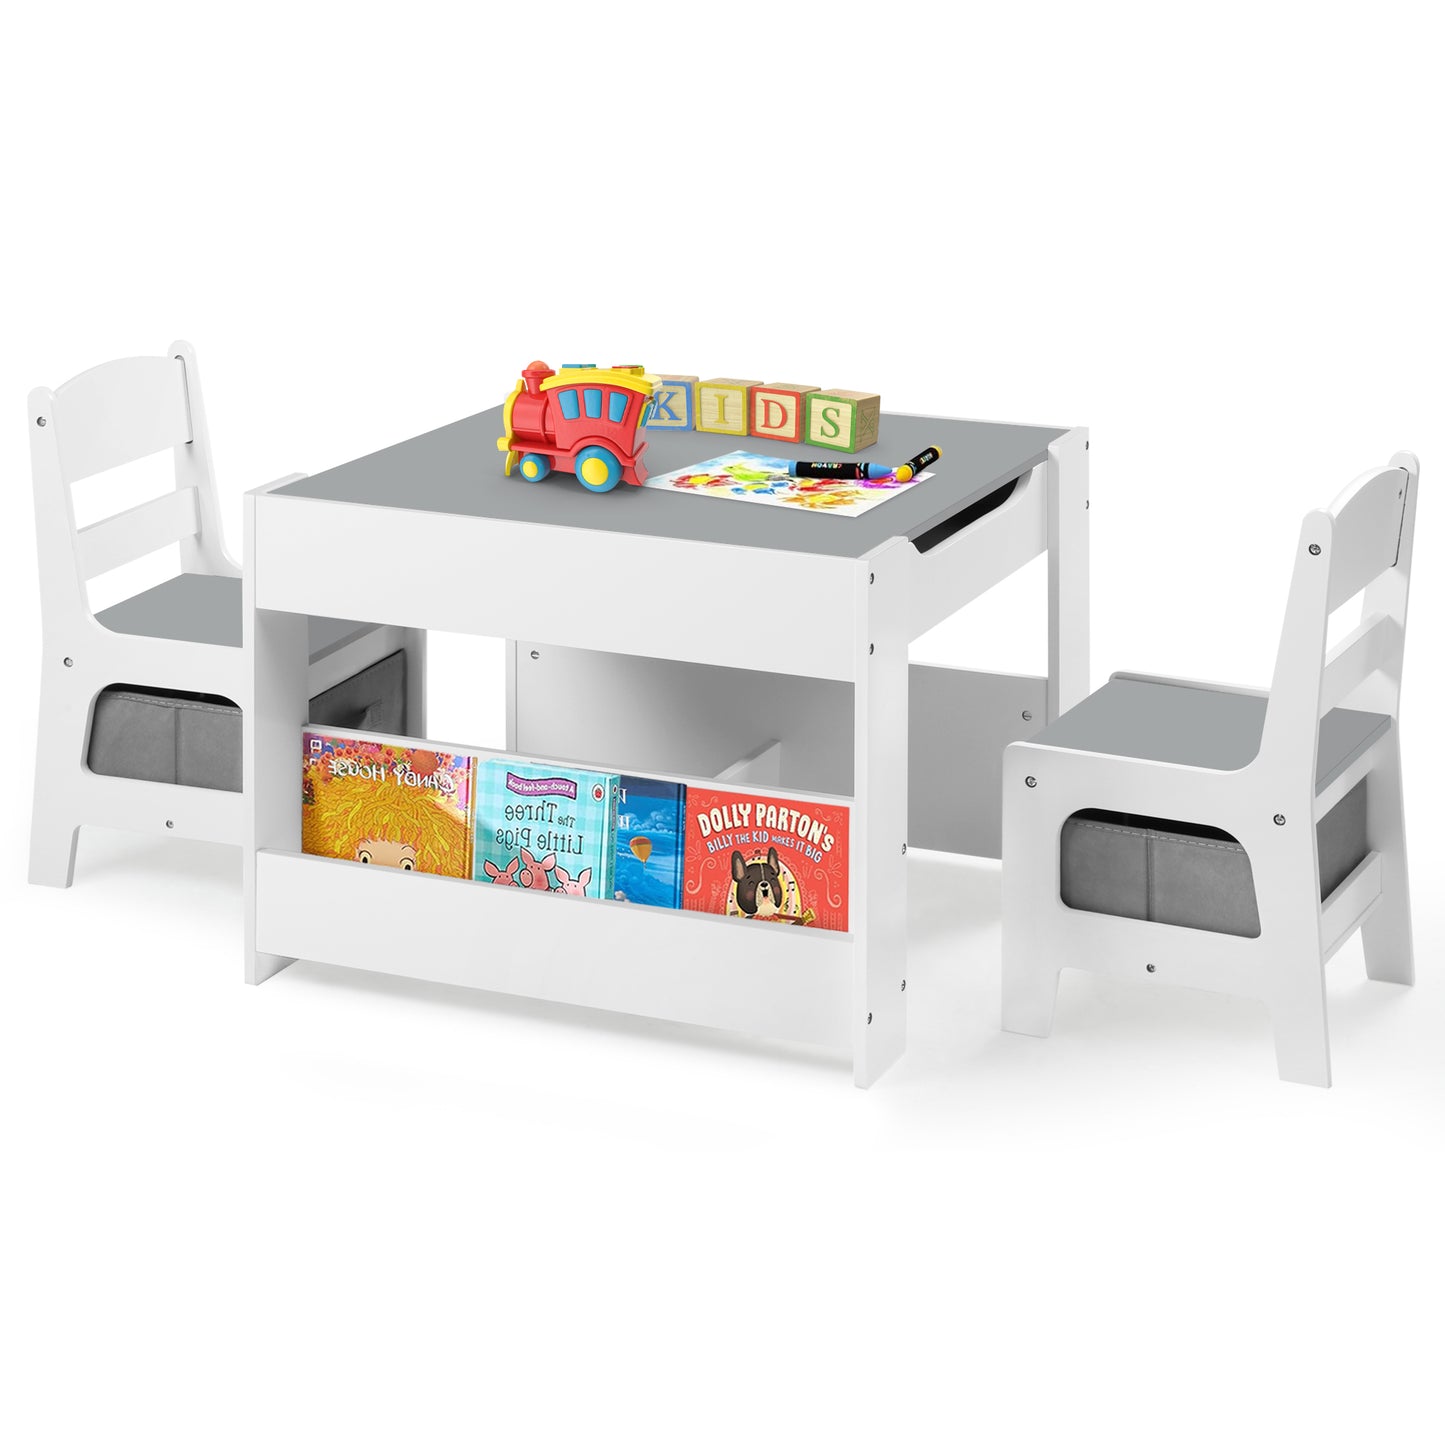 4 in 1 Kids Wood Table & 2 Chairs Set, Children Activity Table for Toddler w/Storage, Grey